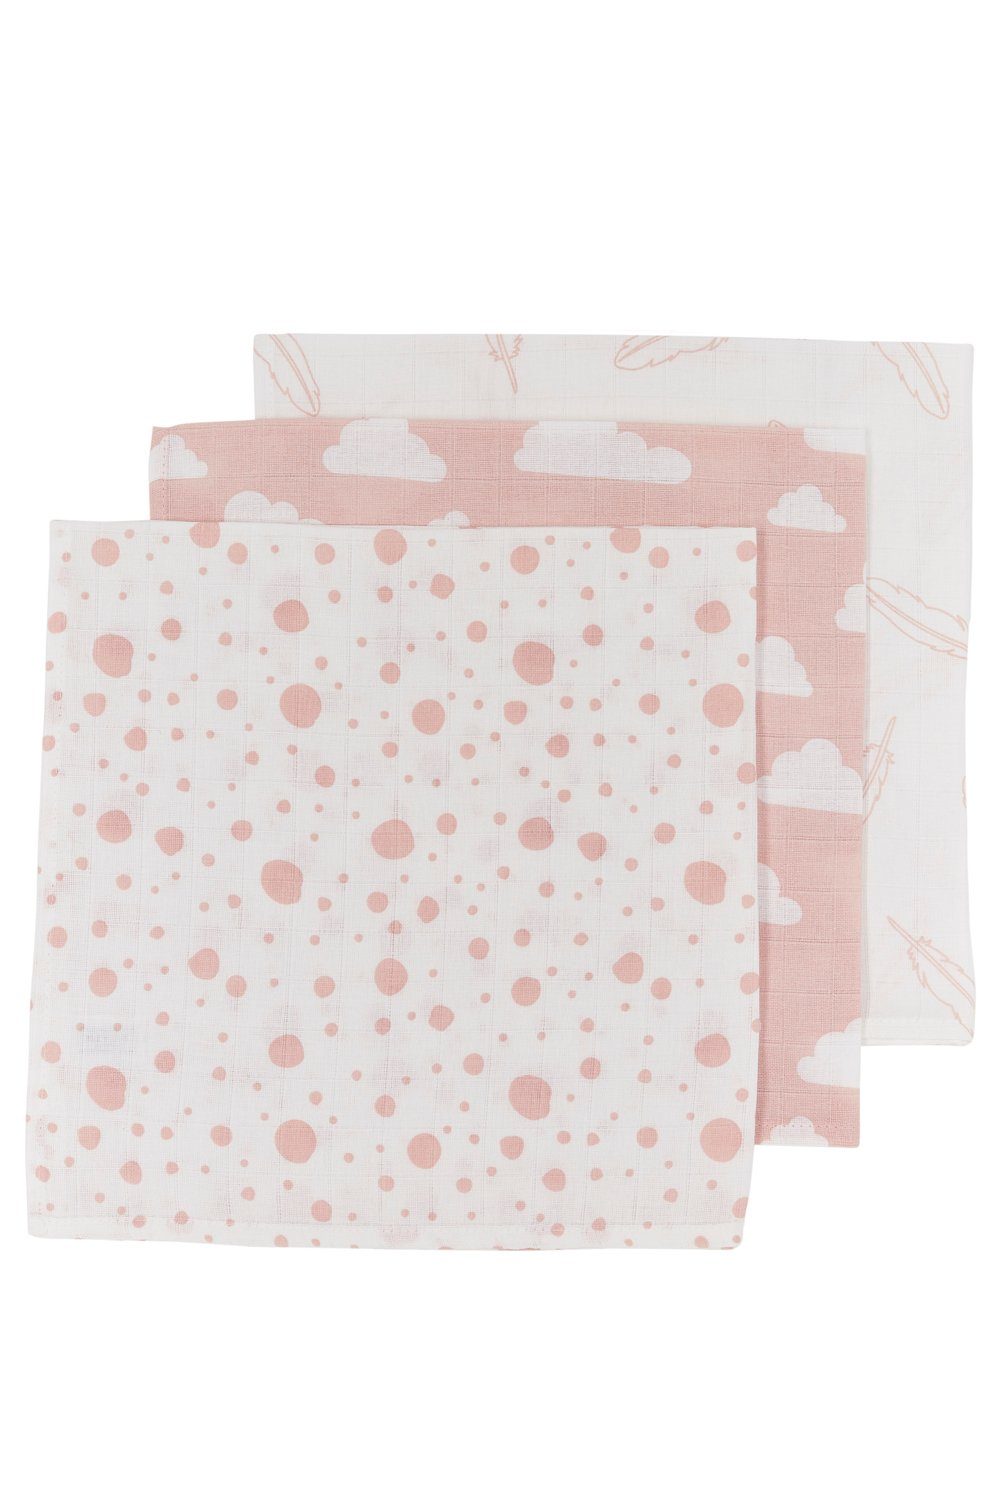 Meyco Baby Stoffwindeln Clouds, Dots, Feathers Pink (3-St), 30x30cm